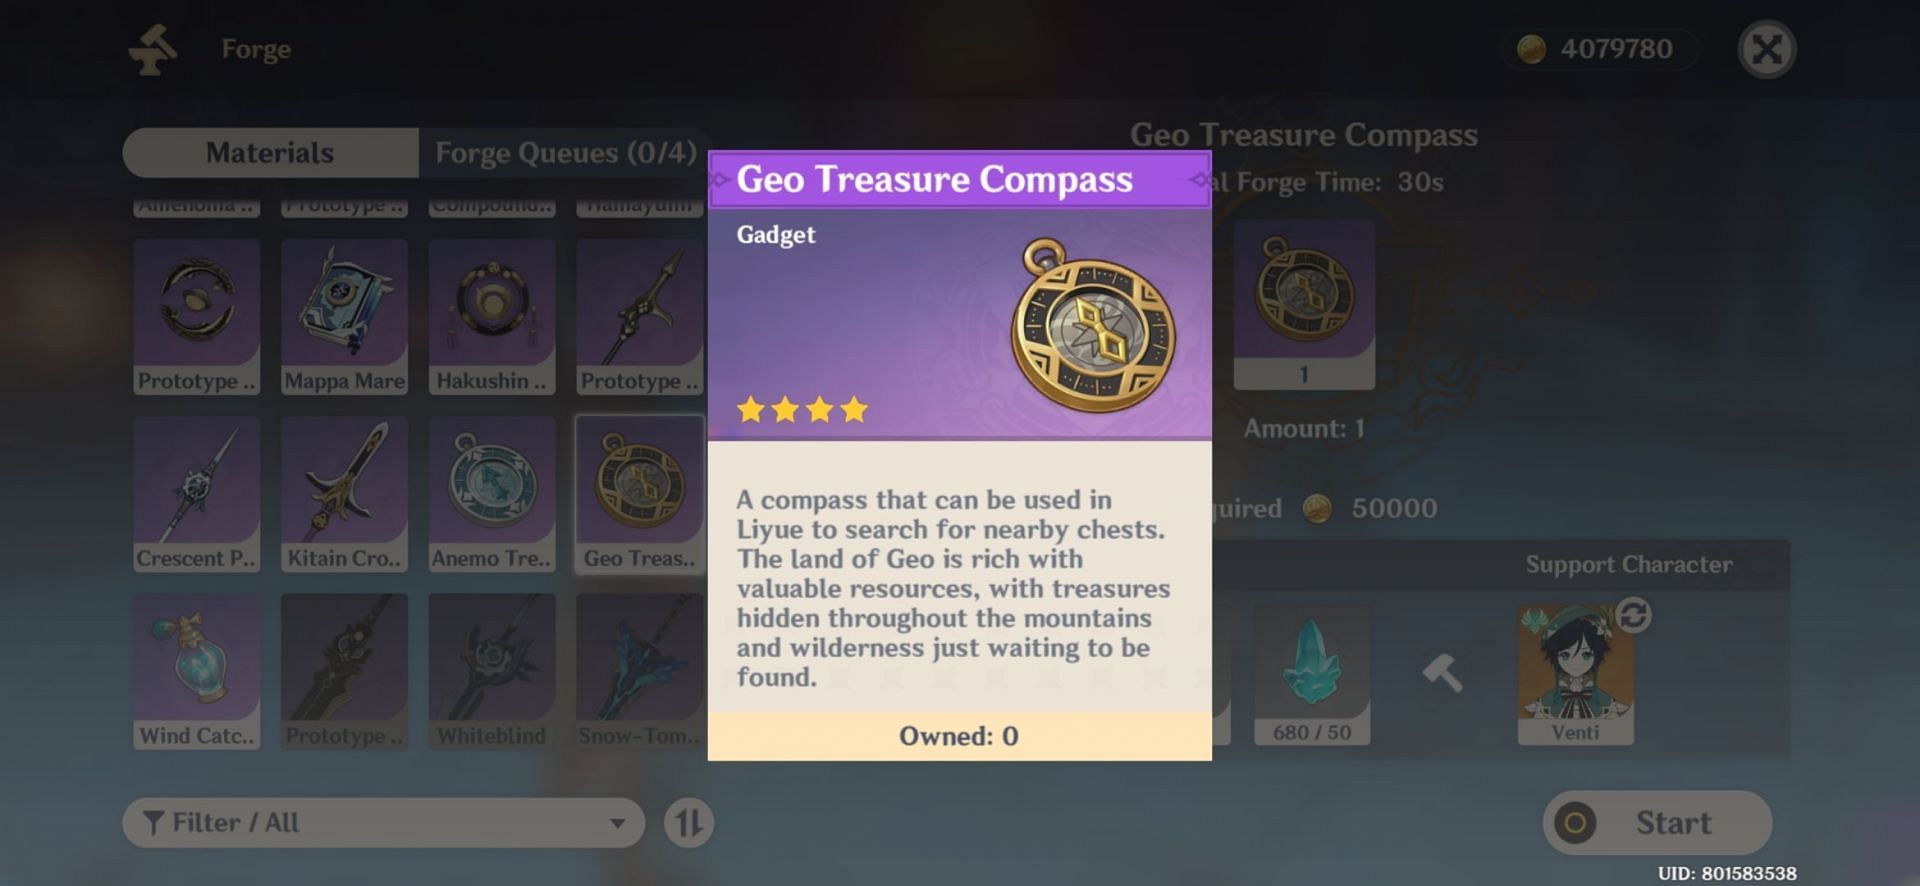 Geo treasure compass can help players to find sneaky treasure chests in Chasm (Image via Genshin Impact)